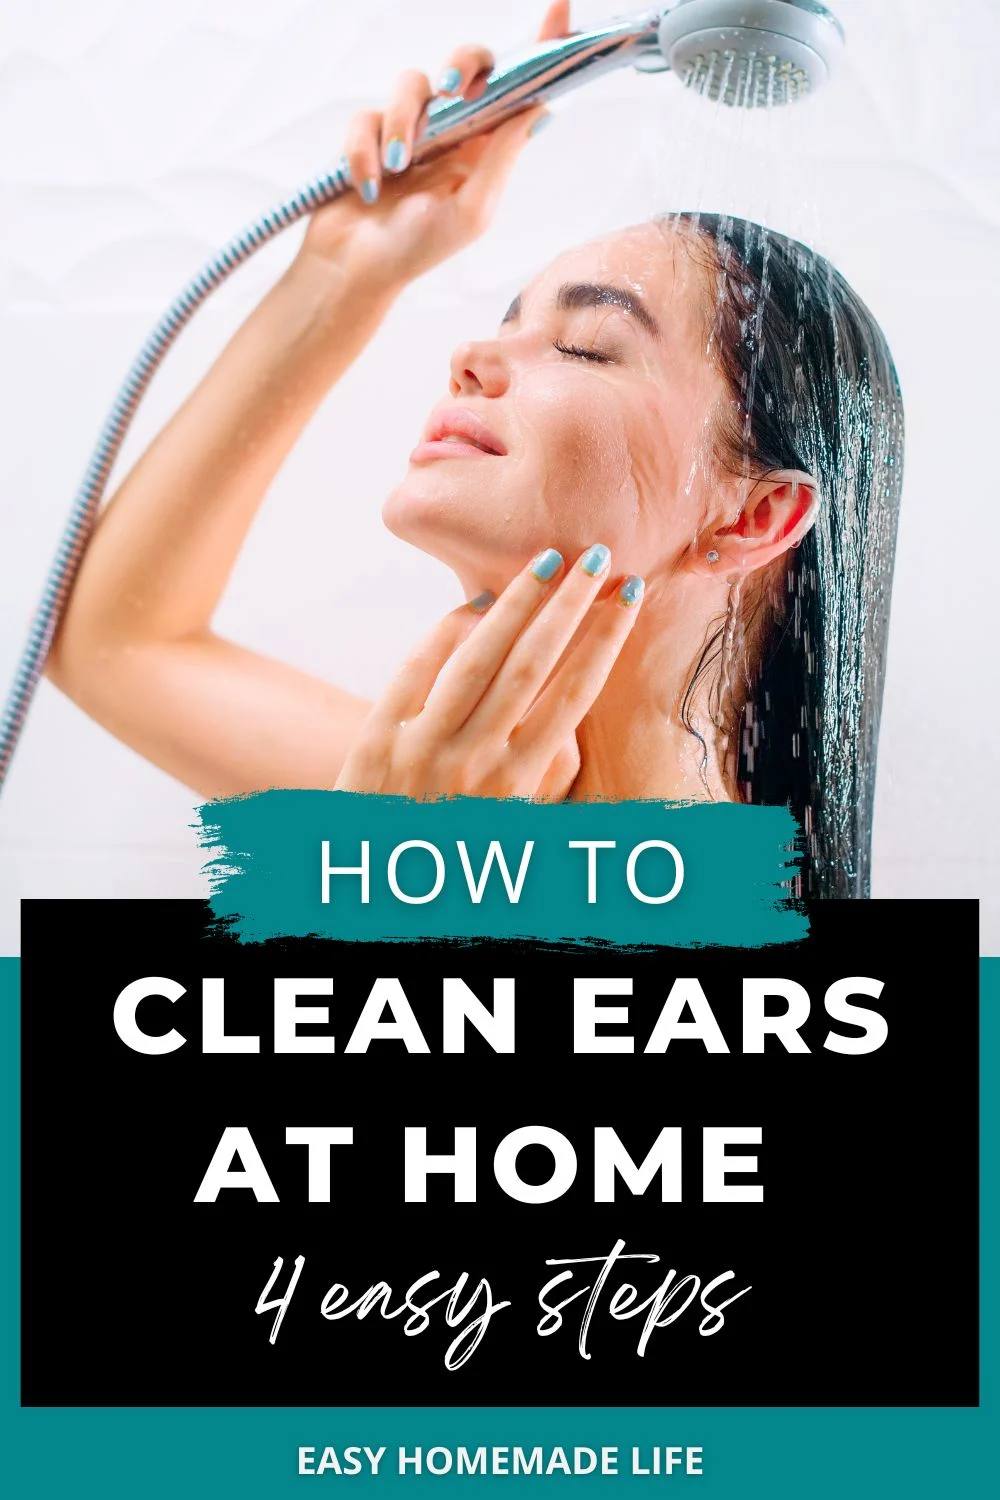 How to clean ears at home, four easy steps.